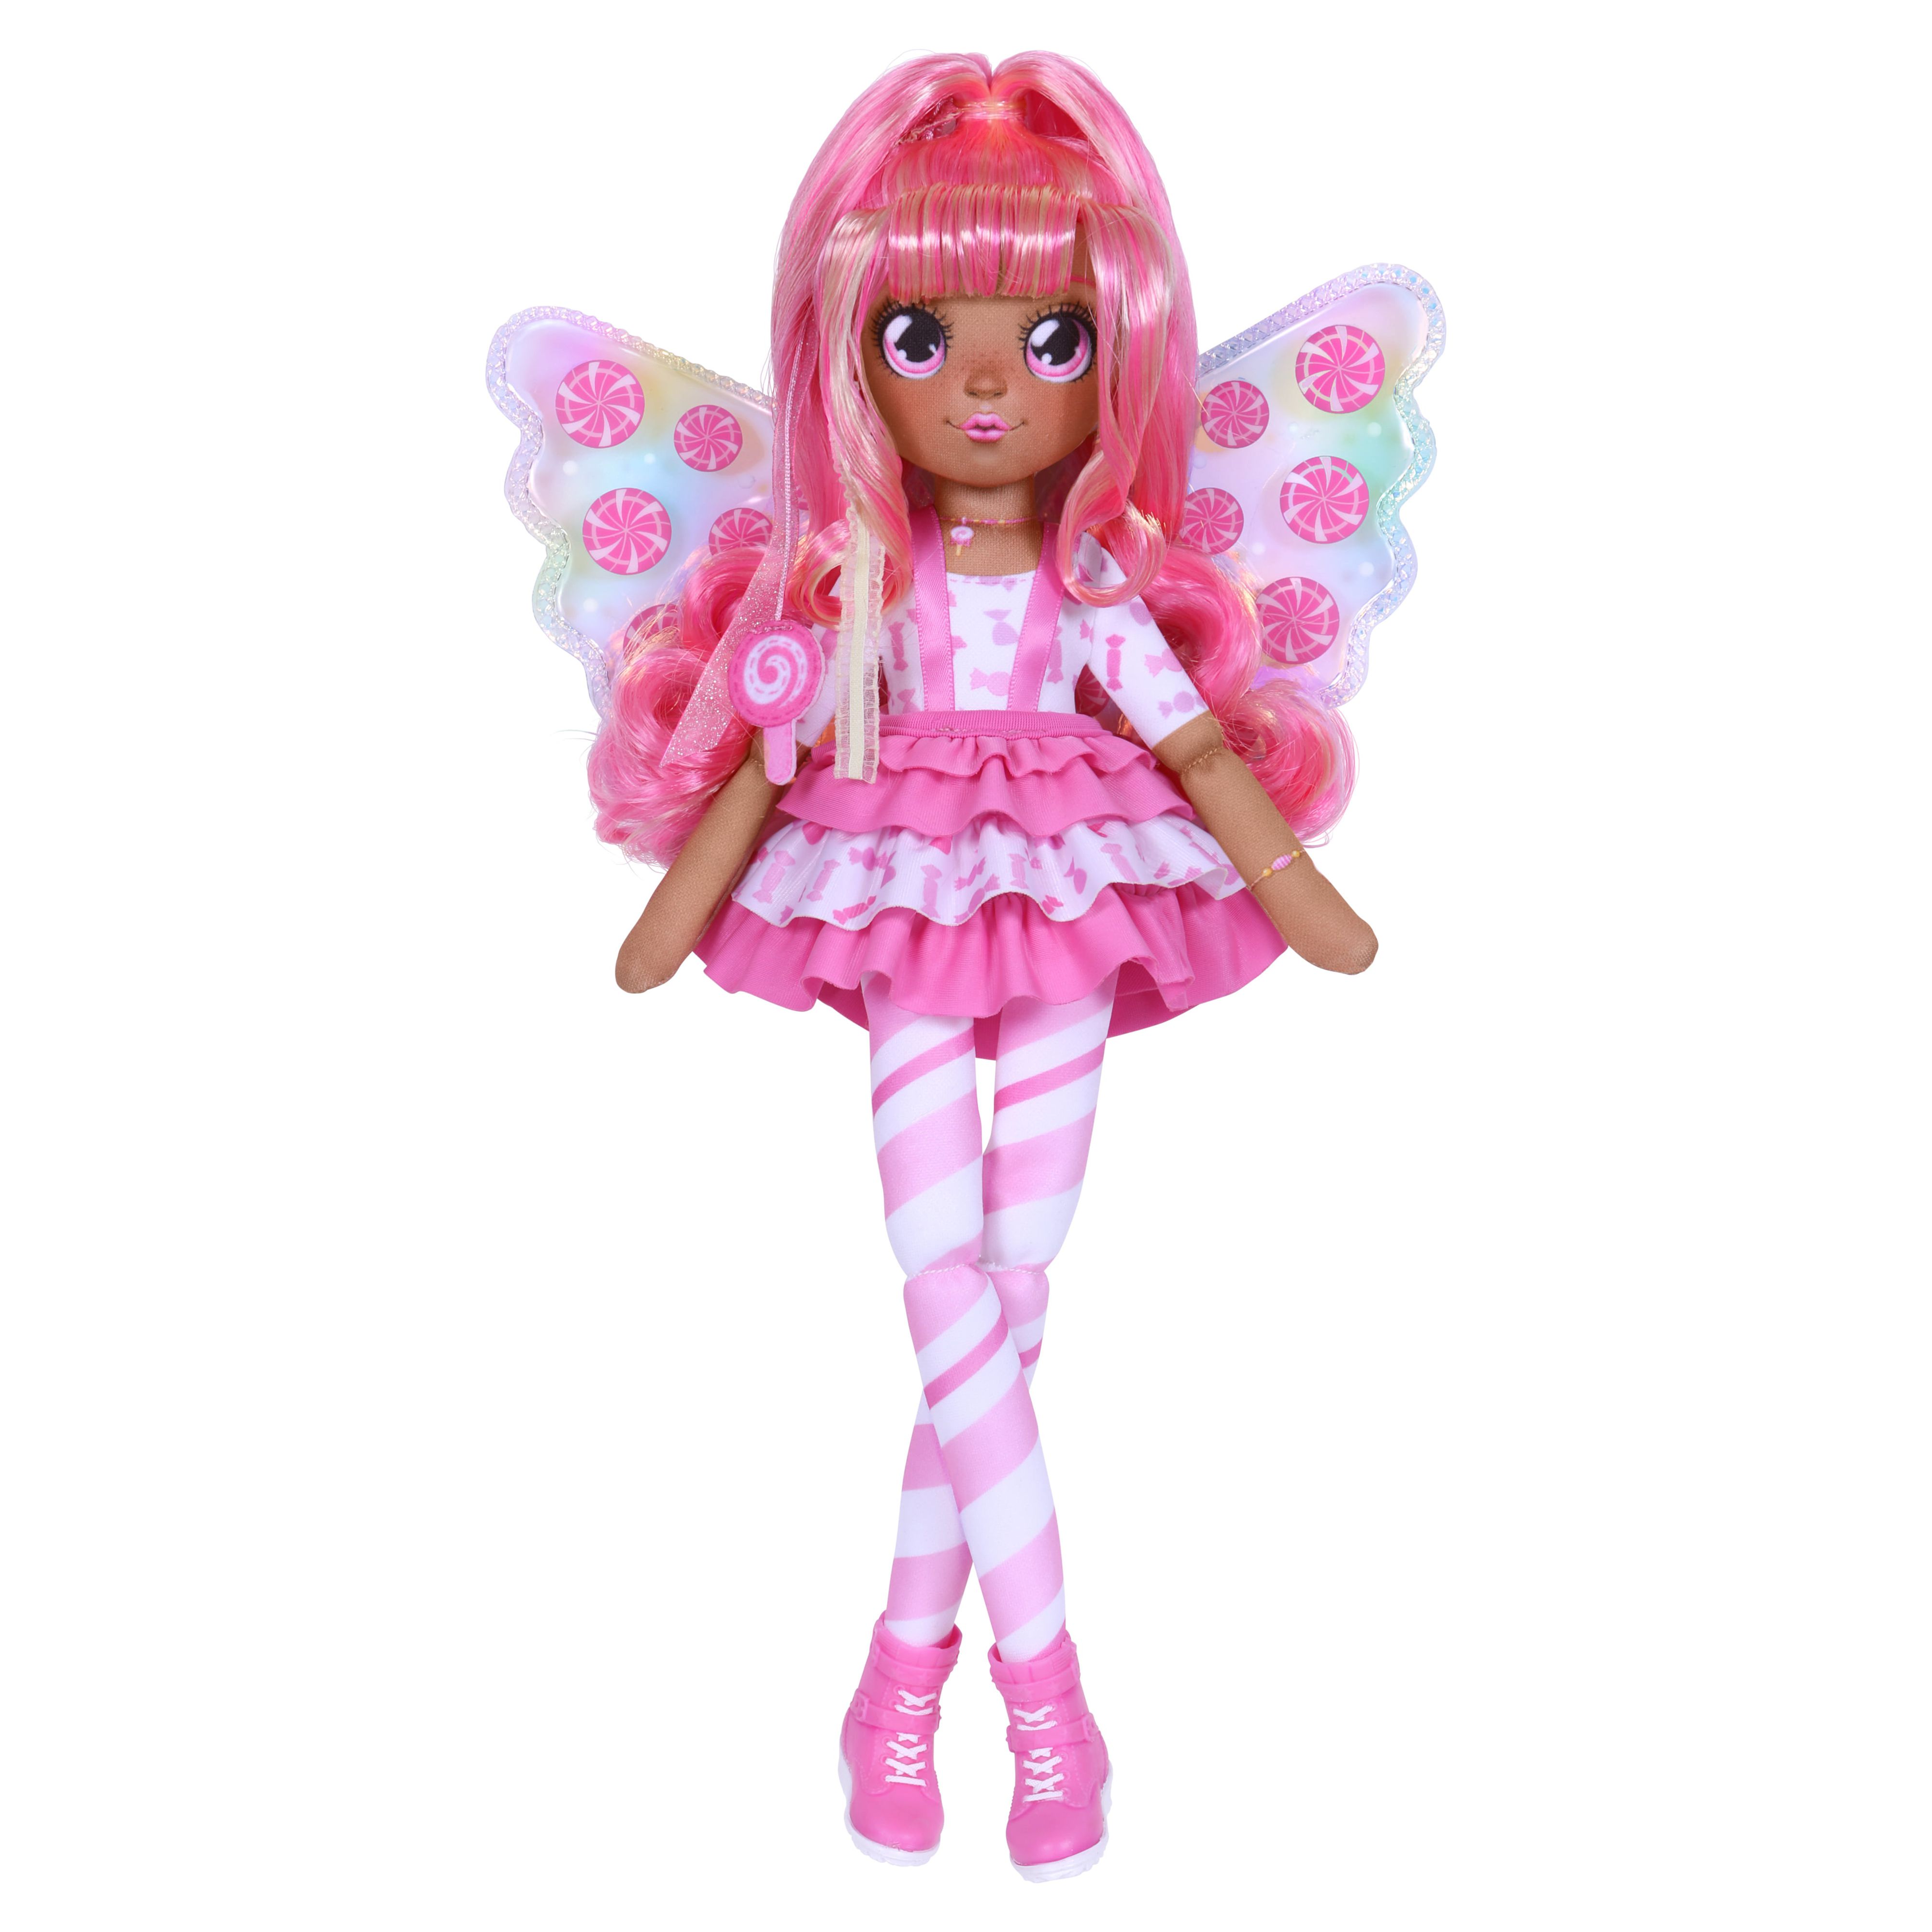 Dream Seeker Magical Fairy Fashion Doll 3 Pack, Candice, Lolli-Ana and Coco, Girls 5+ - image 2 of 13